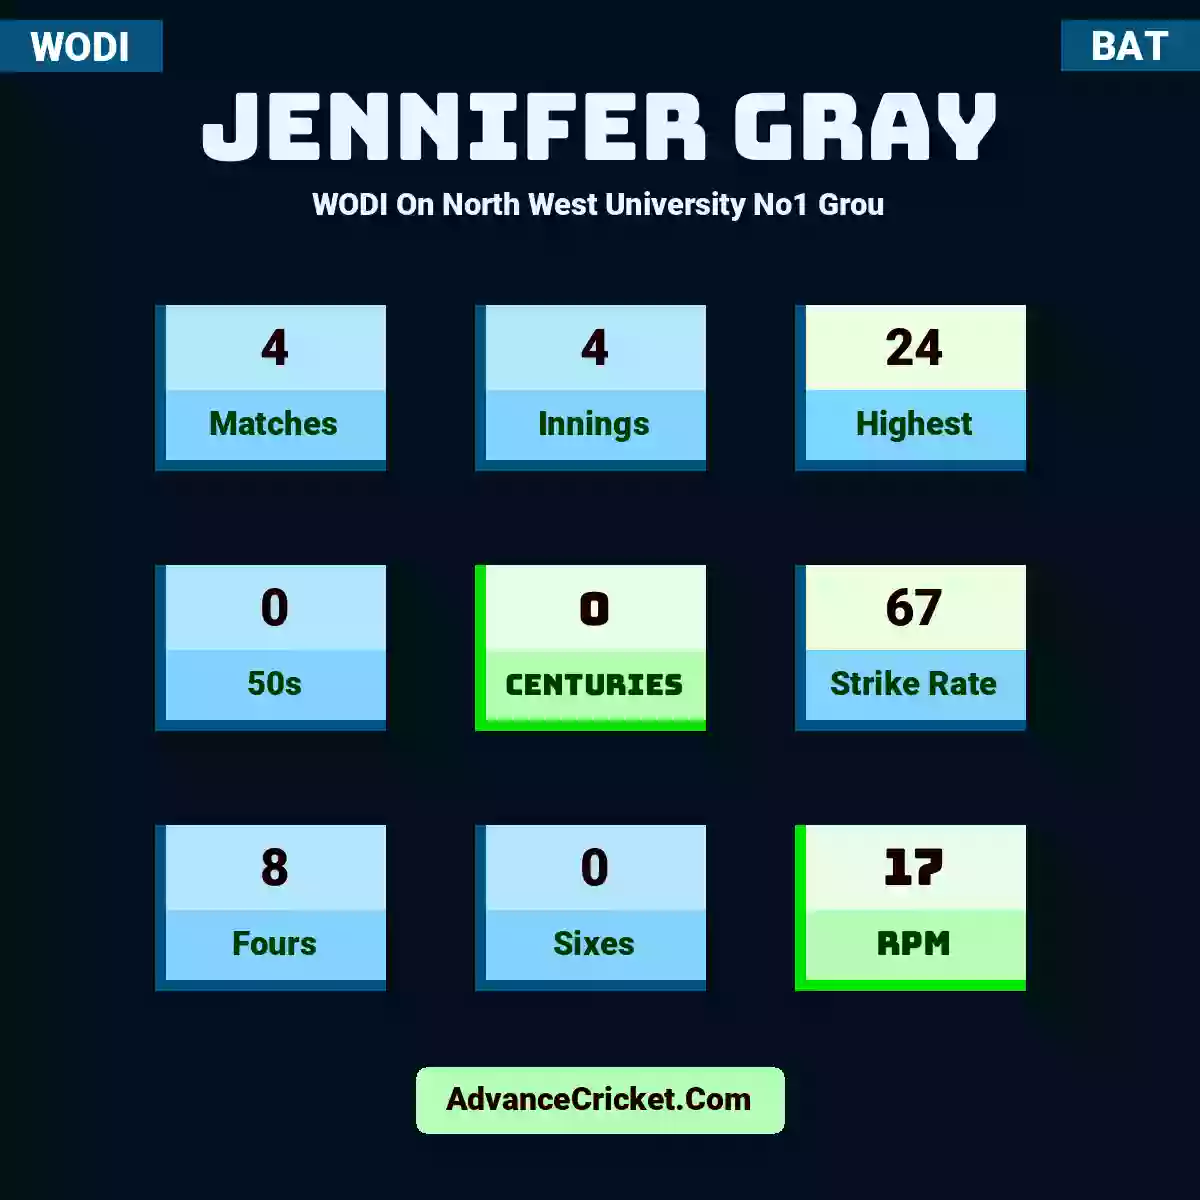 Jennifer Gray WODI  On North West University No1 Grou, Jennifer Gray played 4 matches, scored 24 runs as highest, 0 half-centuries, and 0 centuries, with a strike rate of 67. J.Gray hit 8 fours and 0 sixes, with an RPM of 17.